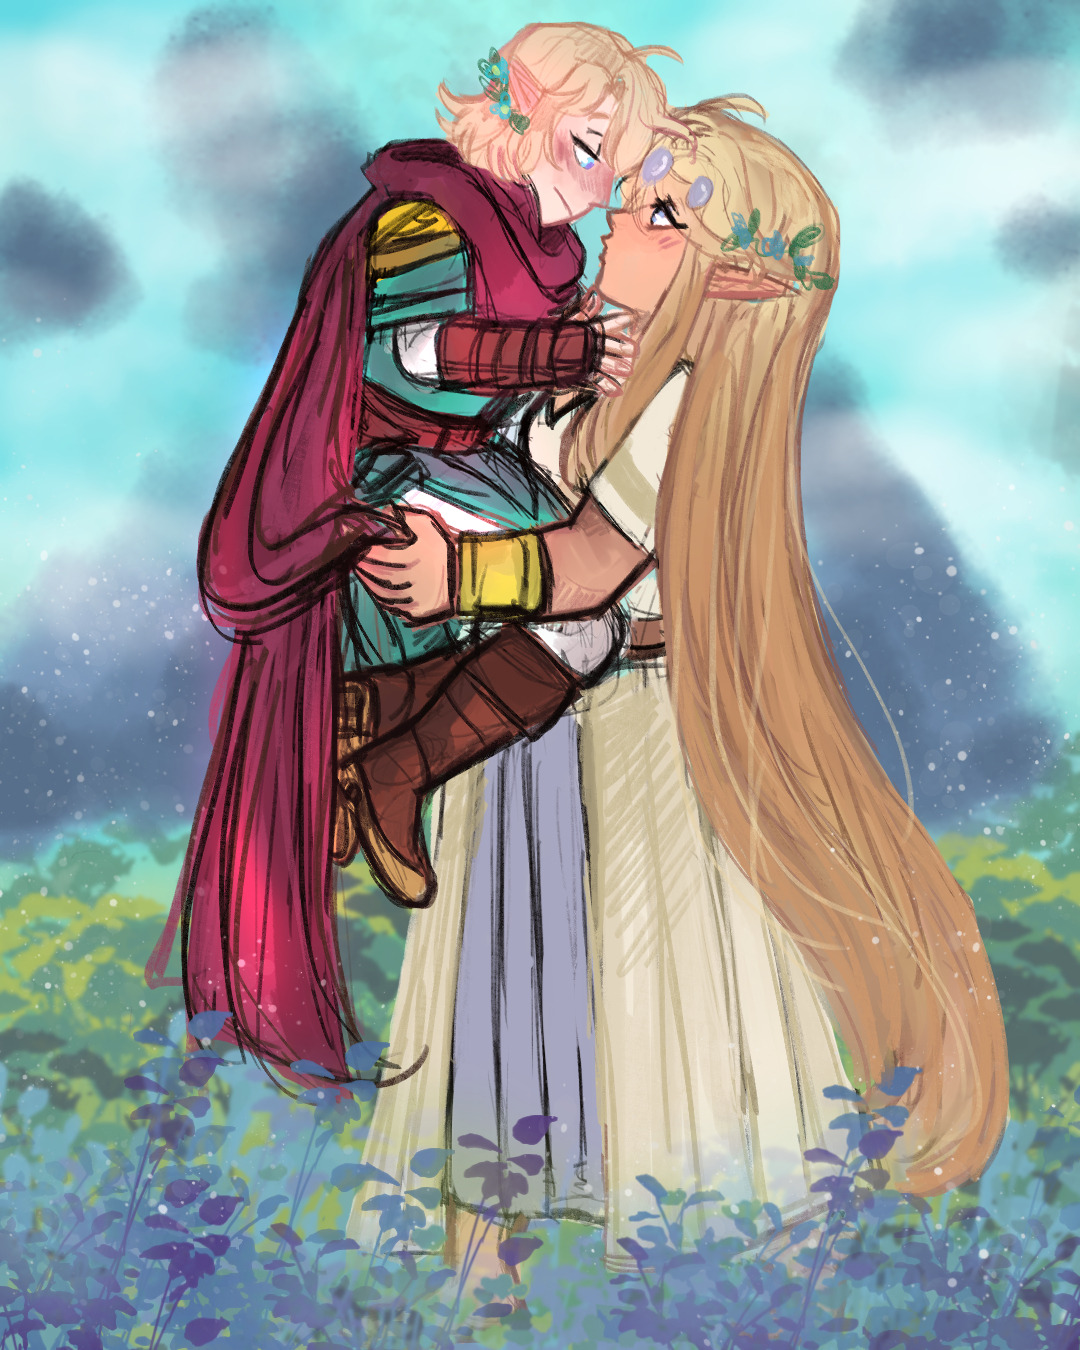 Hylia lifting up First in a field of flowers.